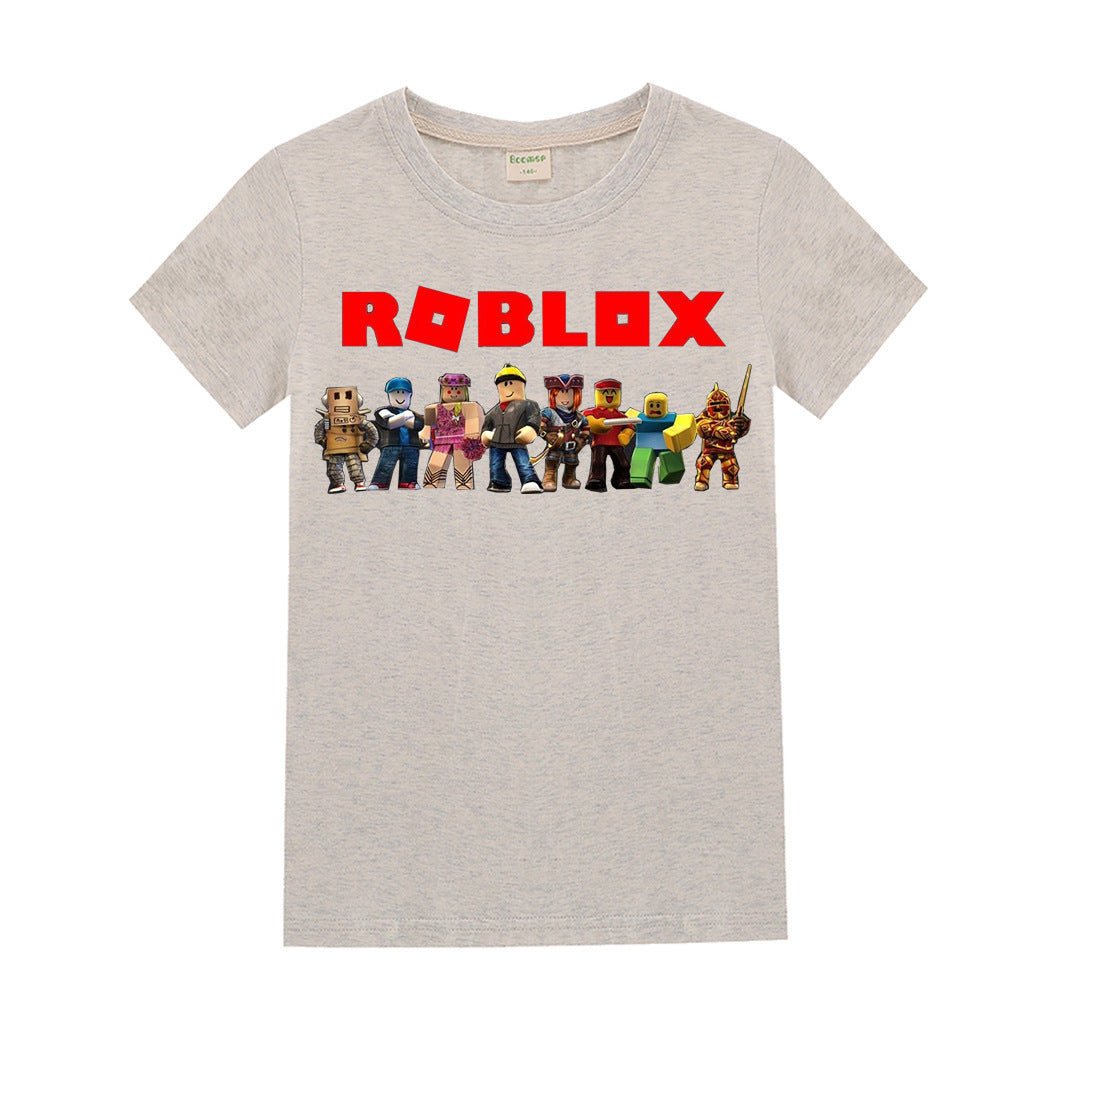 aminibi- Roblox t-shirt  for Boys and Girls